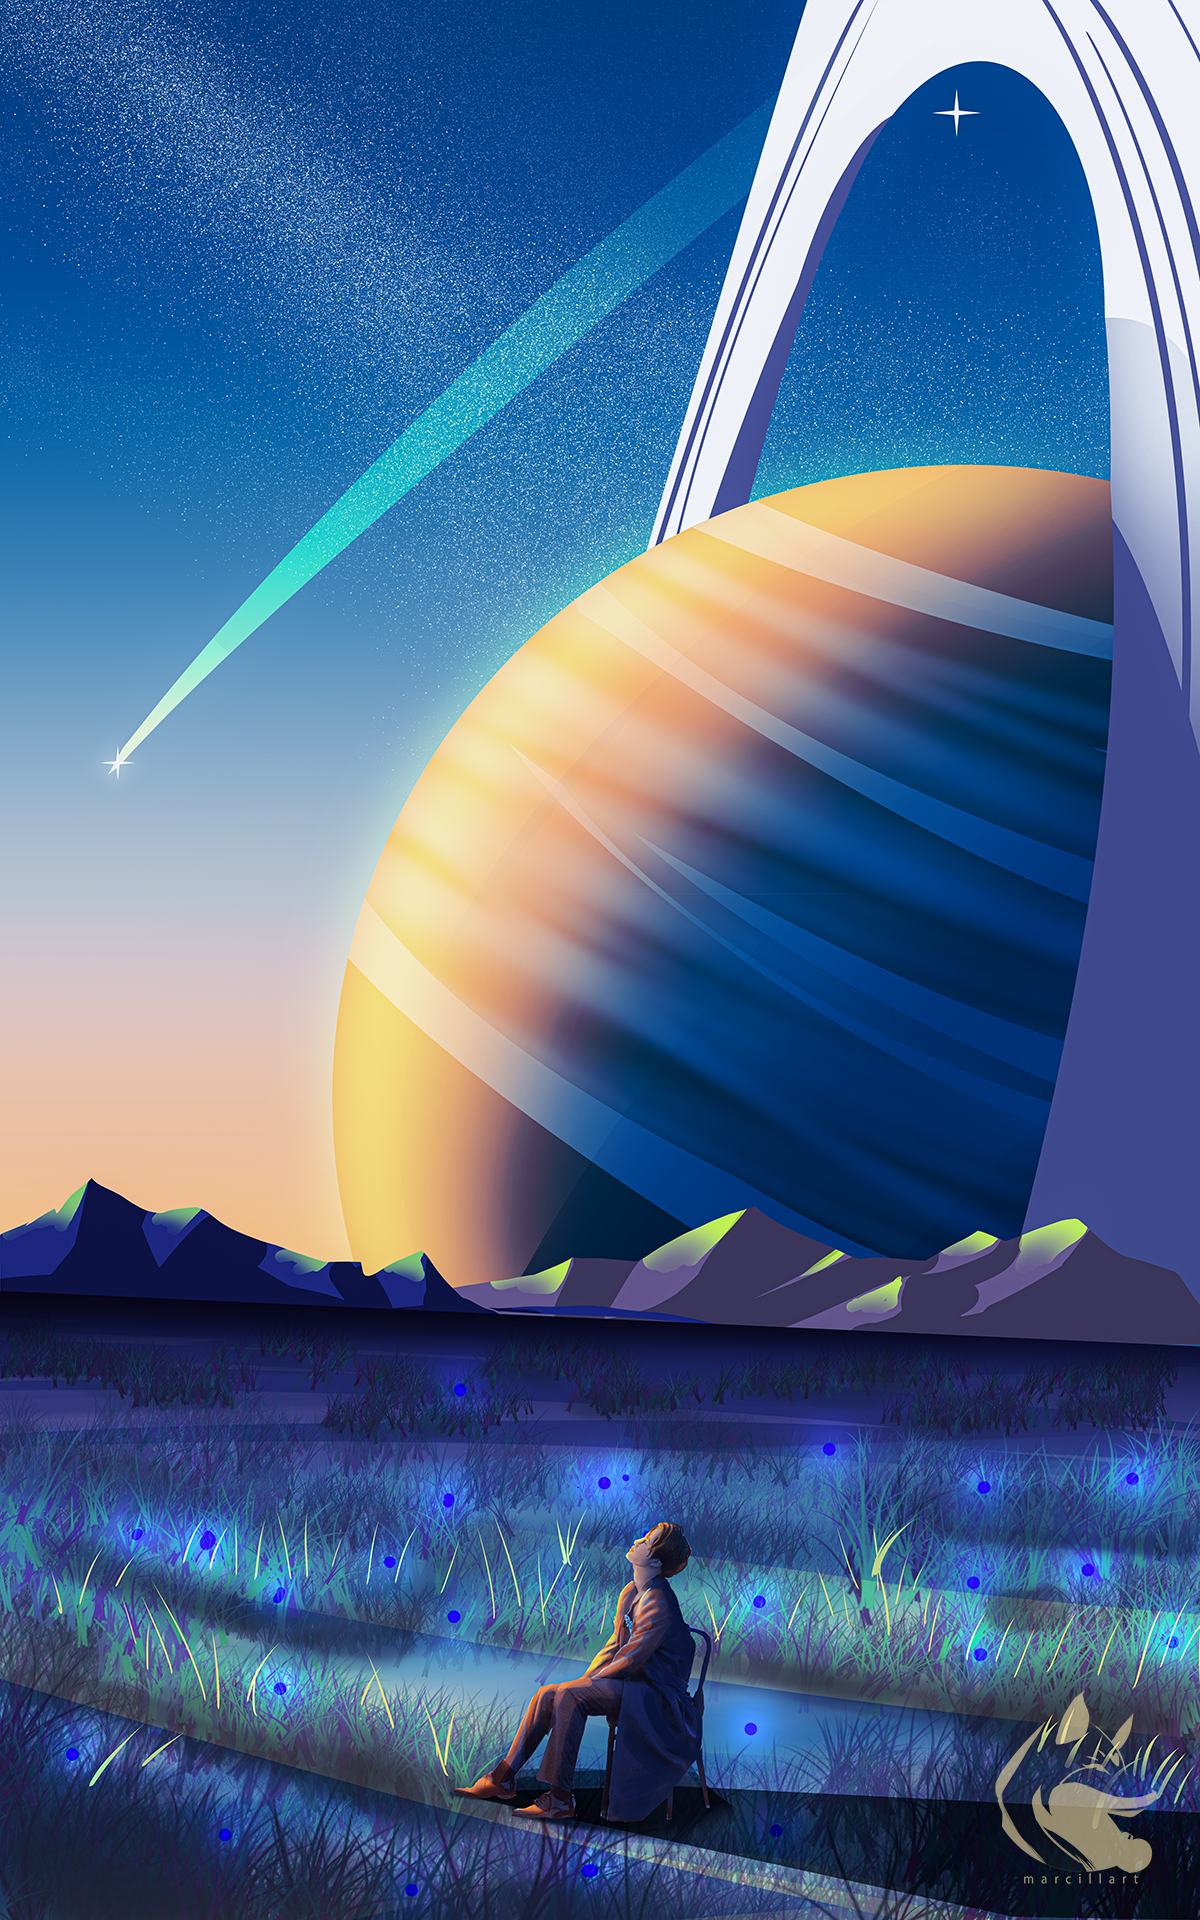 General 1200x1920 planetary rings planet mountains sitting grass shooting stars sunset